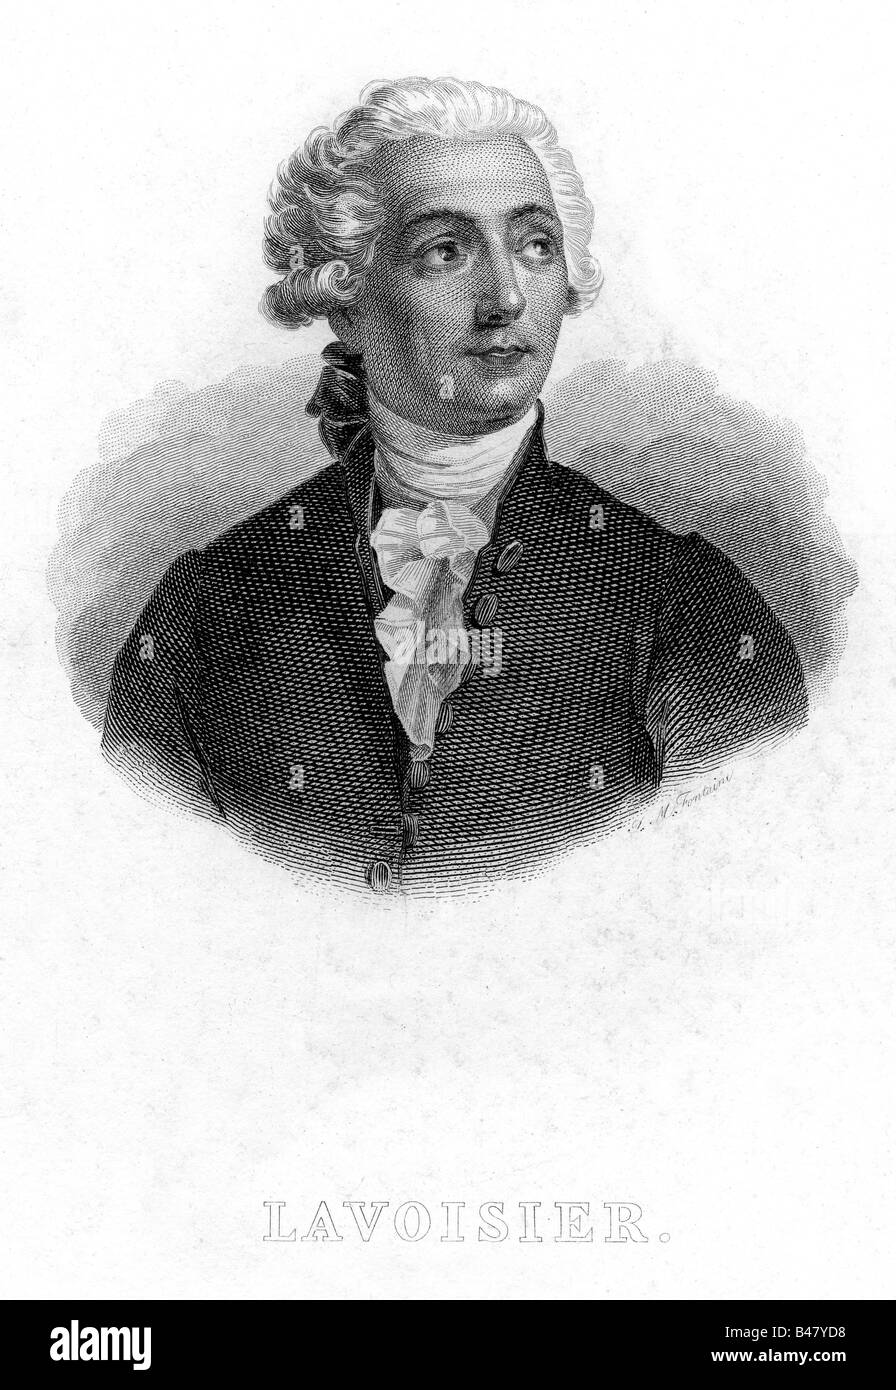 Lavoisier, Antoine Laurent de, 26.8.1743 - 8.5.1794, French chemist, portrait, engraving 19th century, , Artist's Copyright has not to be cleared Stock Photo